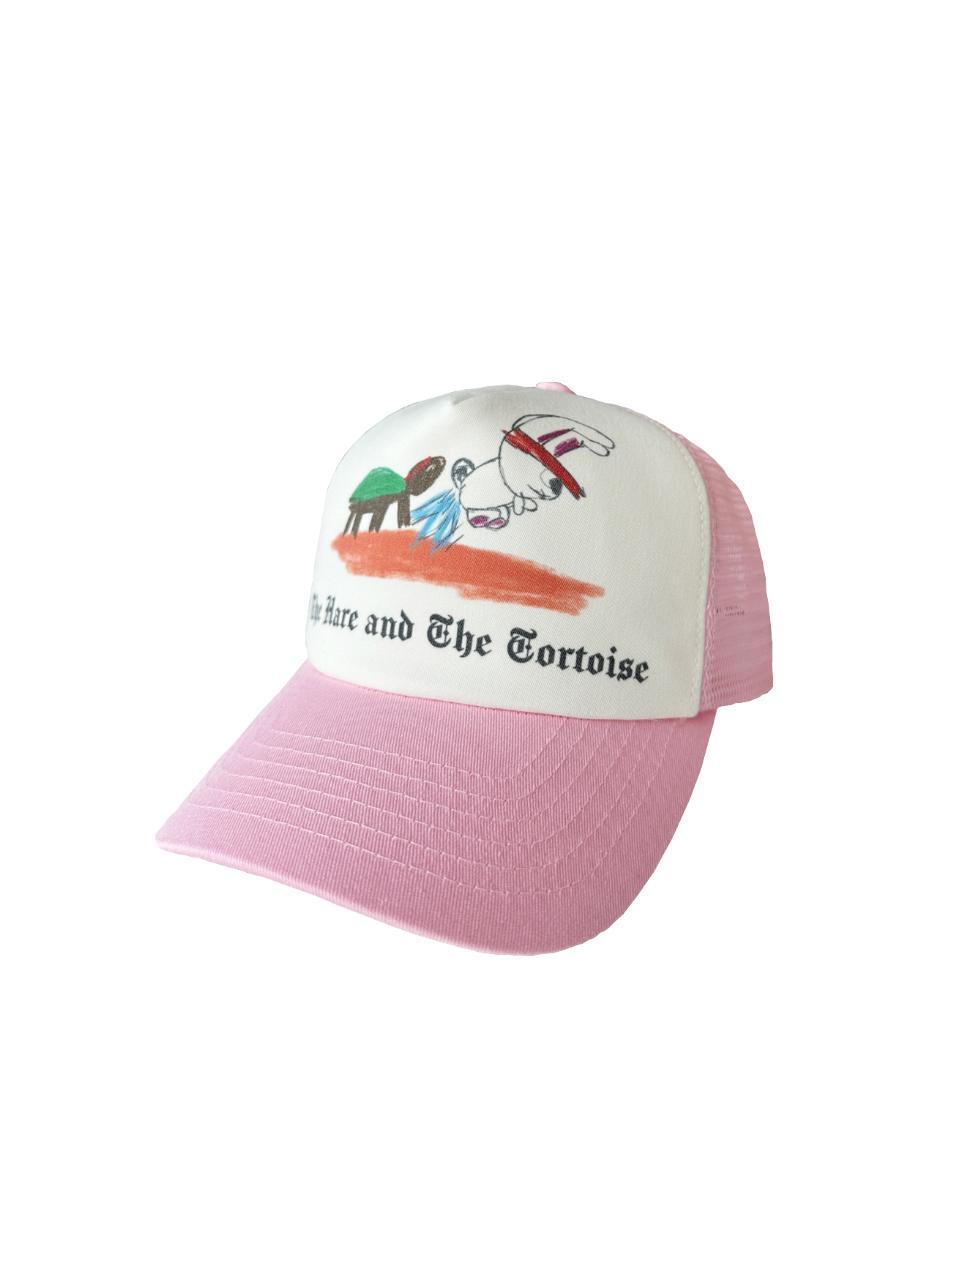 [4th Reorder] [NCT TAEYONG] The Hare and Tortoise Trucker Cap Pink